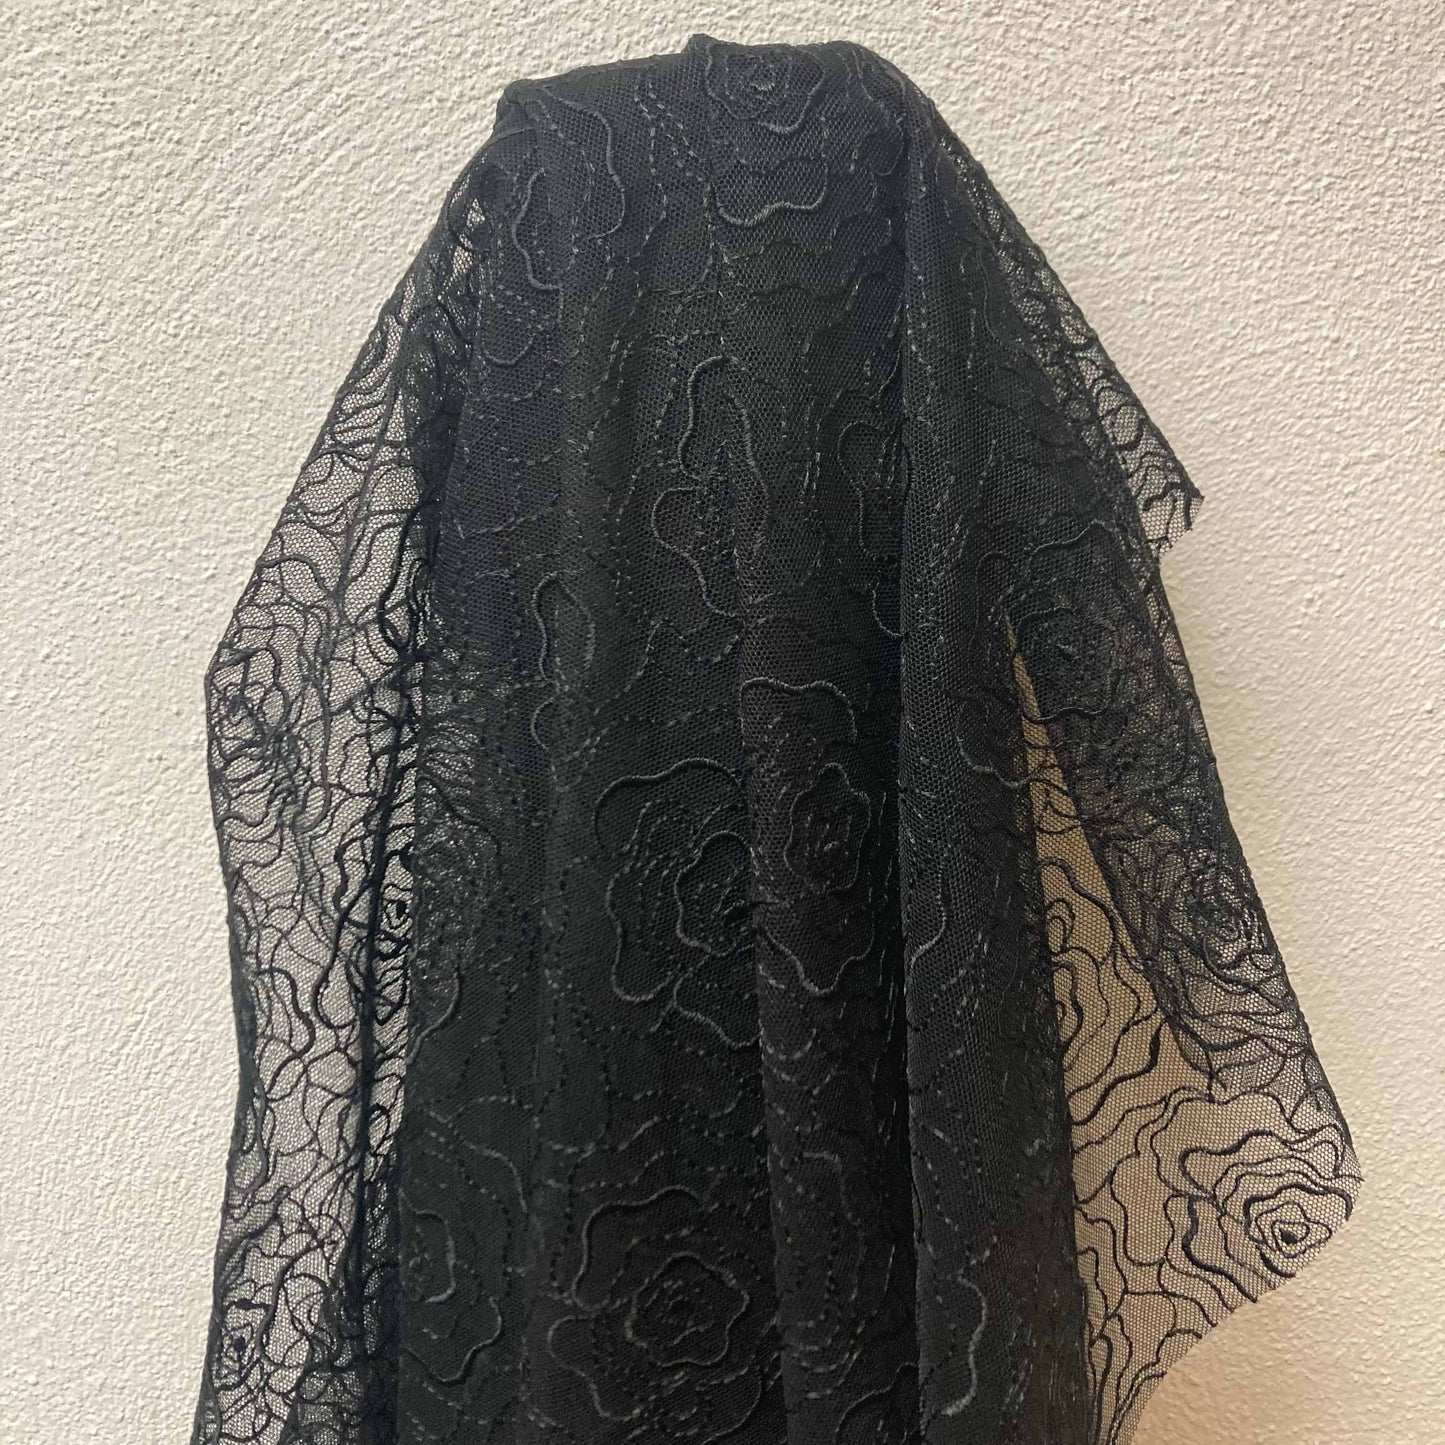 Embroidery Lace fabric - Black